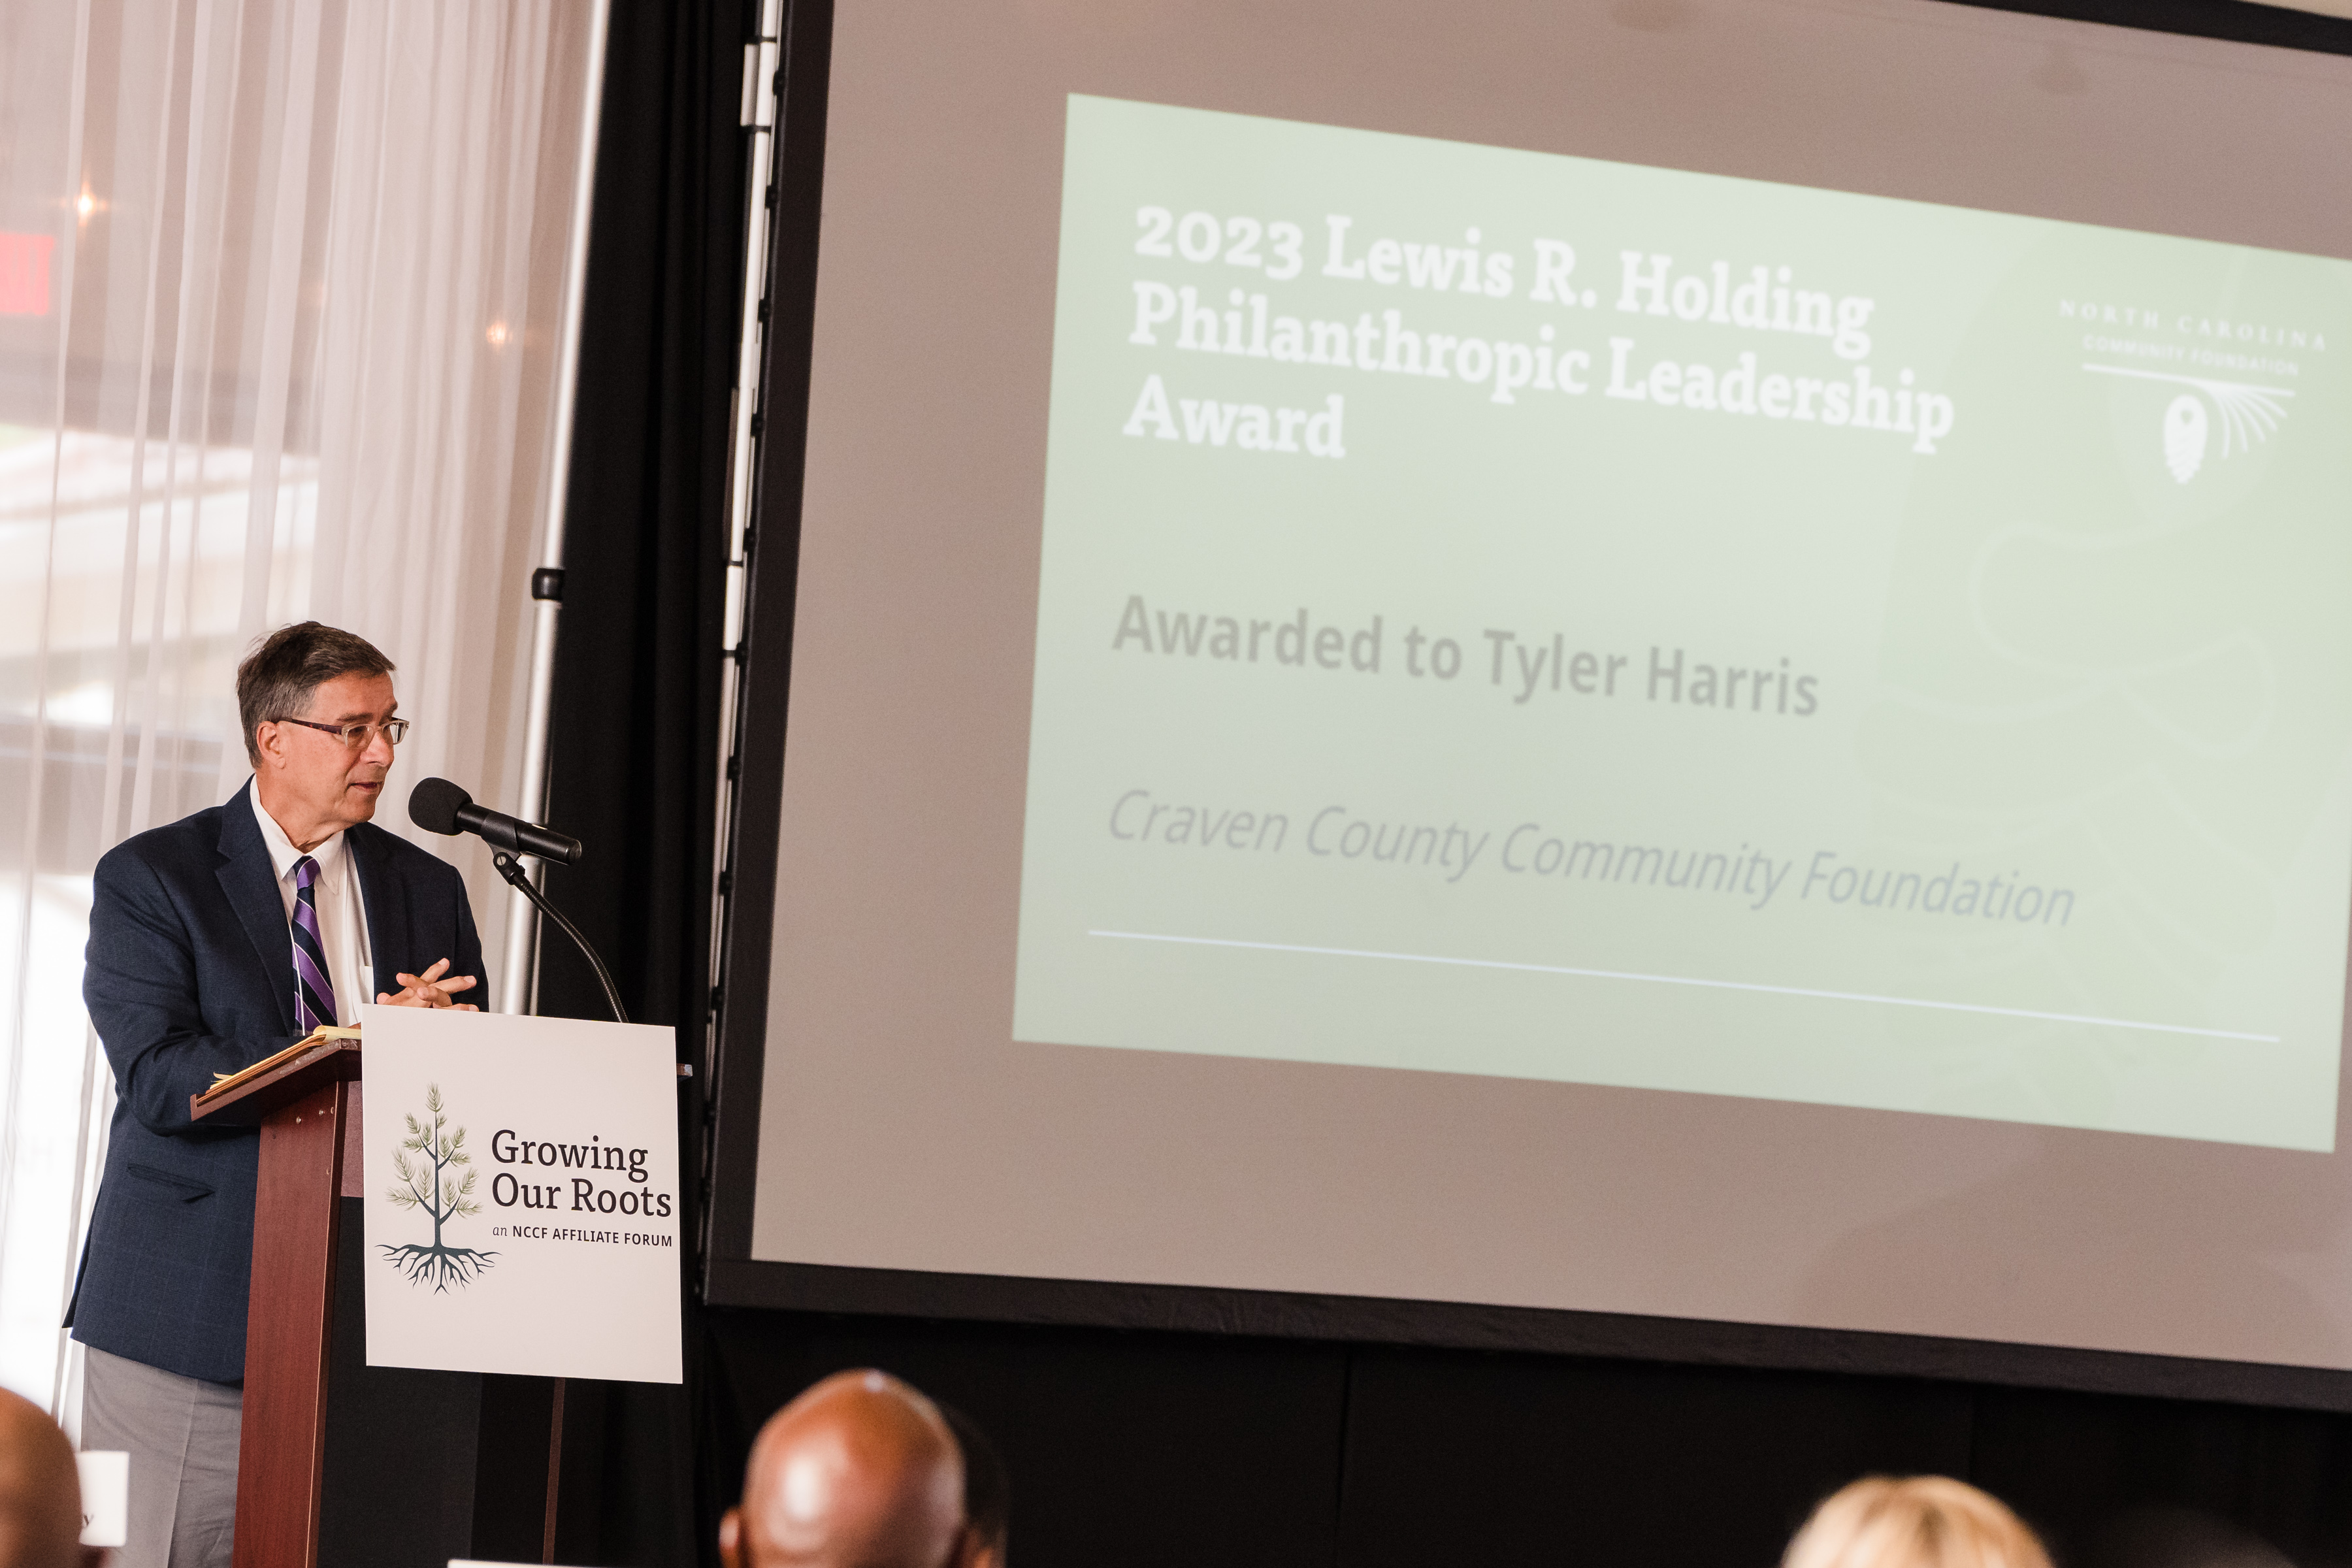 Tyler Harris, a member of the advisory board of the Craven County Community Foundation, is the 2023 recipient of the Lewis R. Holding Philanthropic Leadership Award.